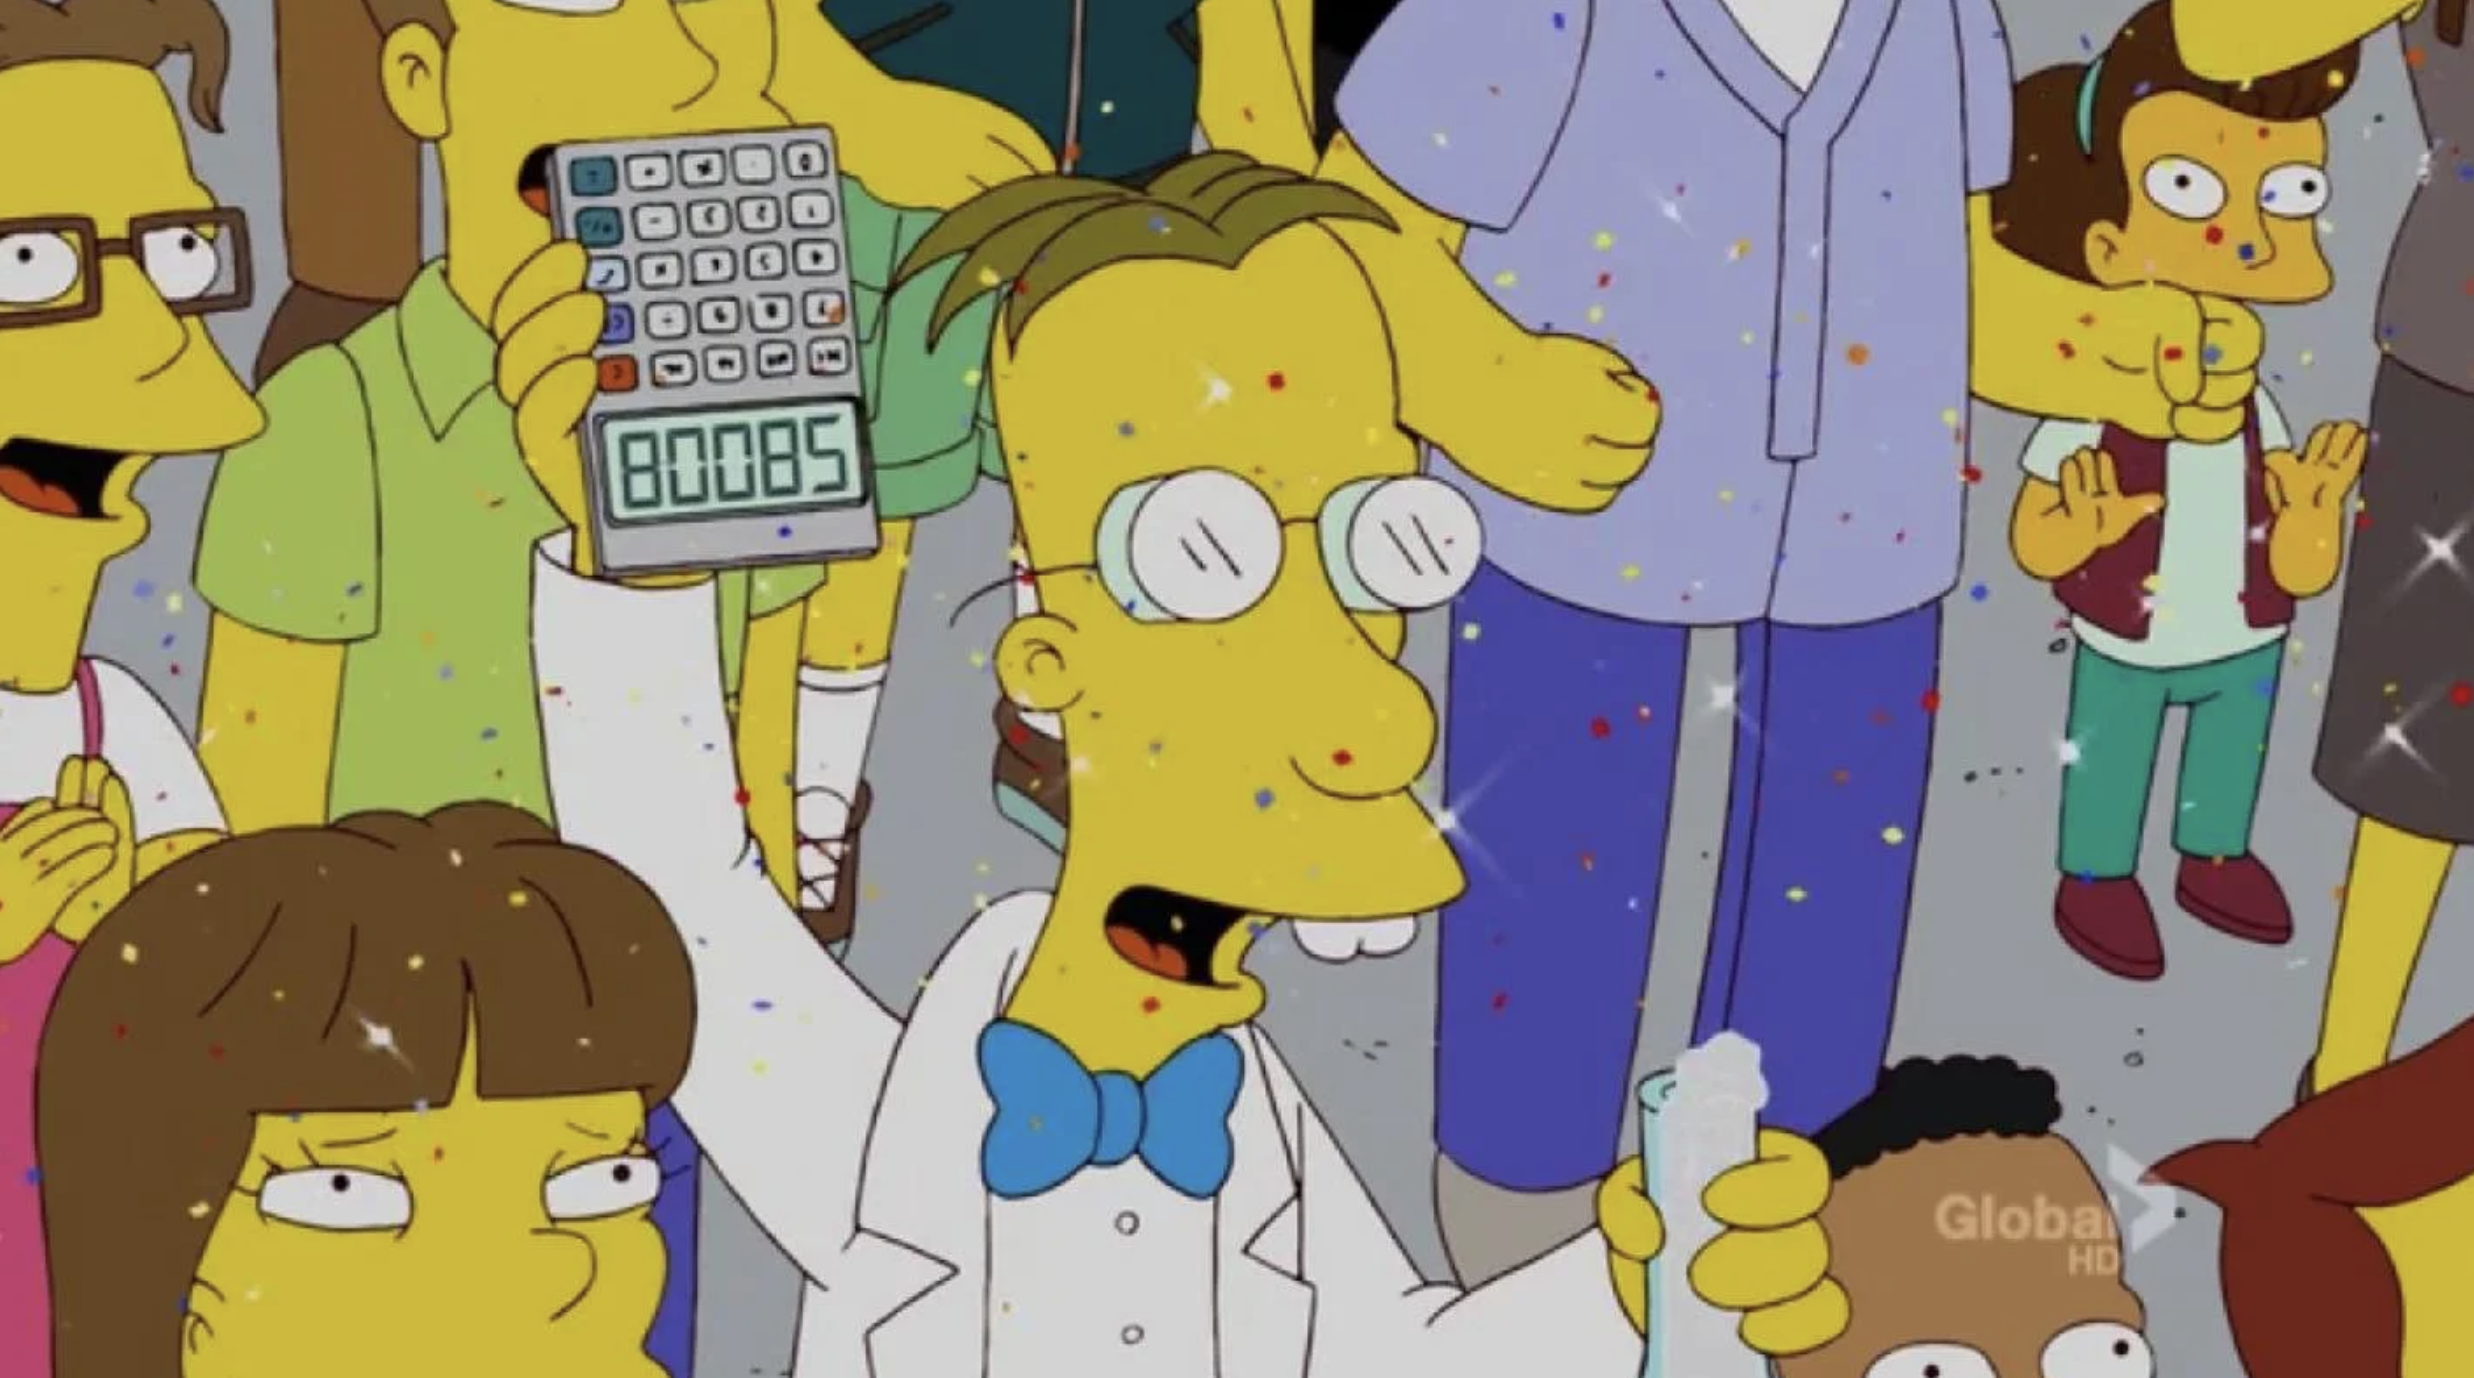 Professor Frink stands in a crowd, holding up a calculator that reads 80085, or &#x27;boobs&#x27;